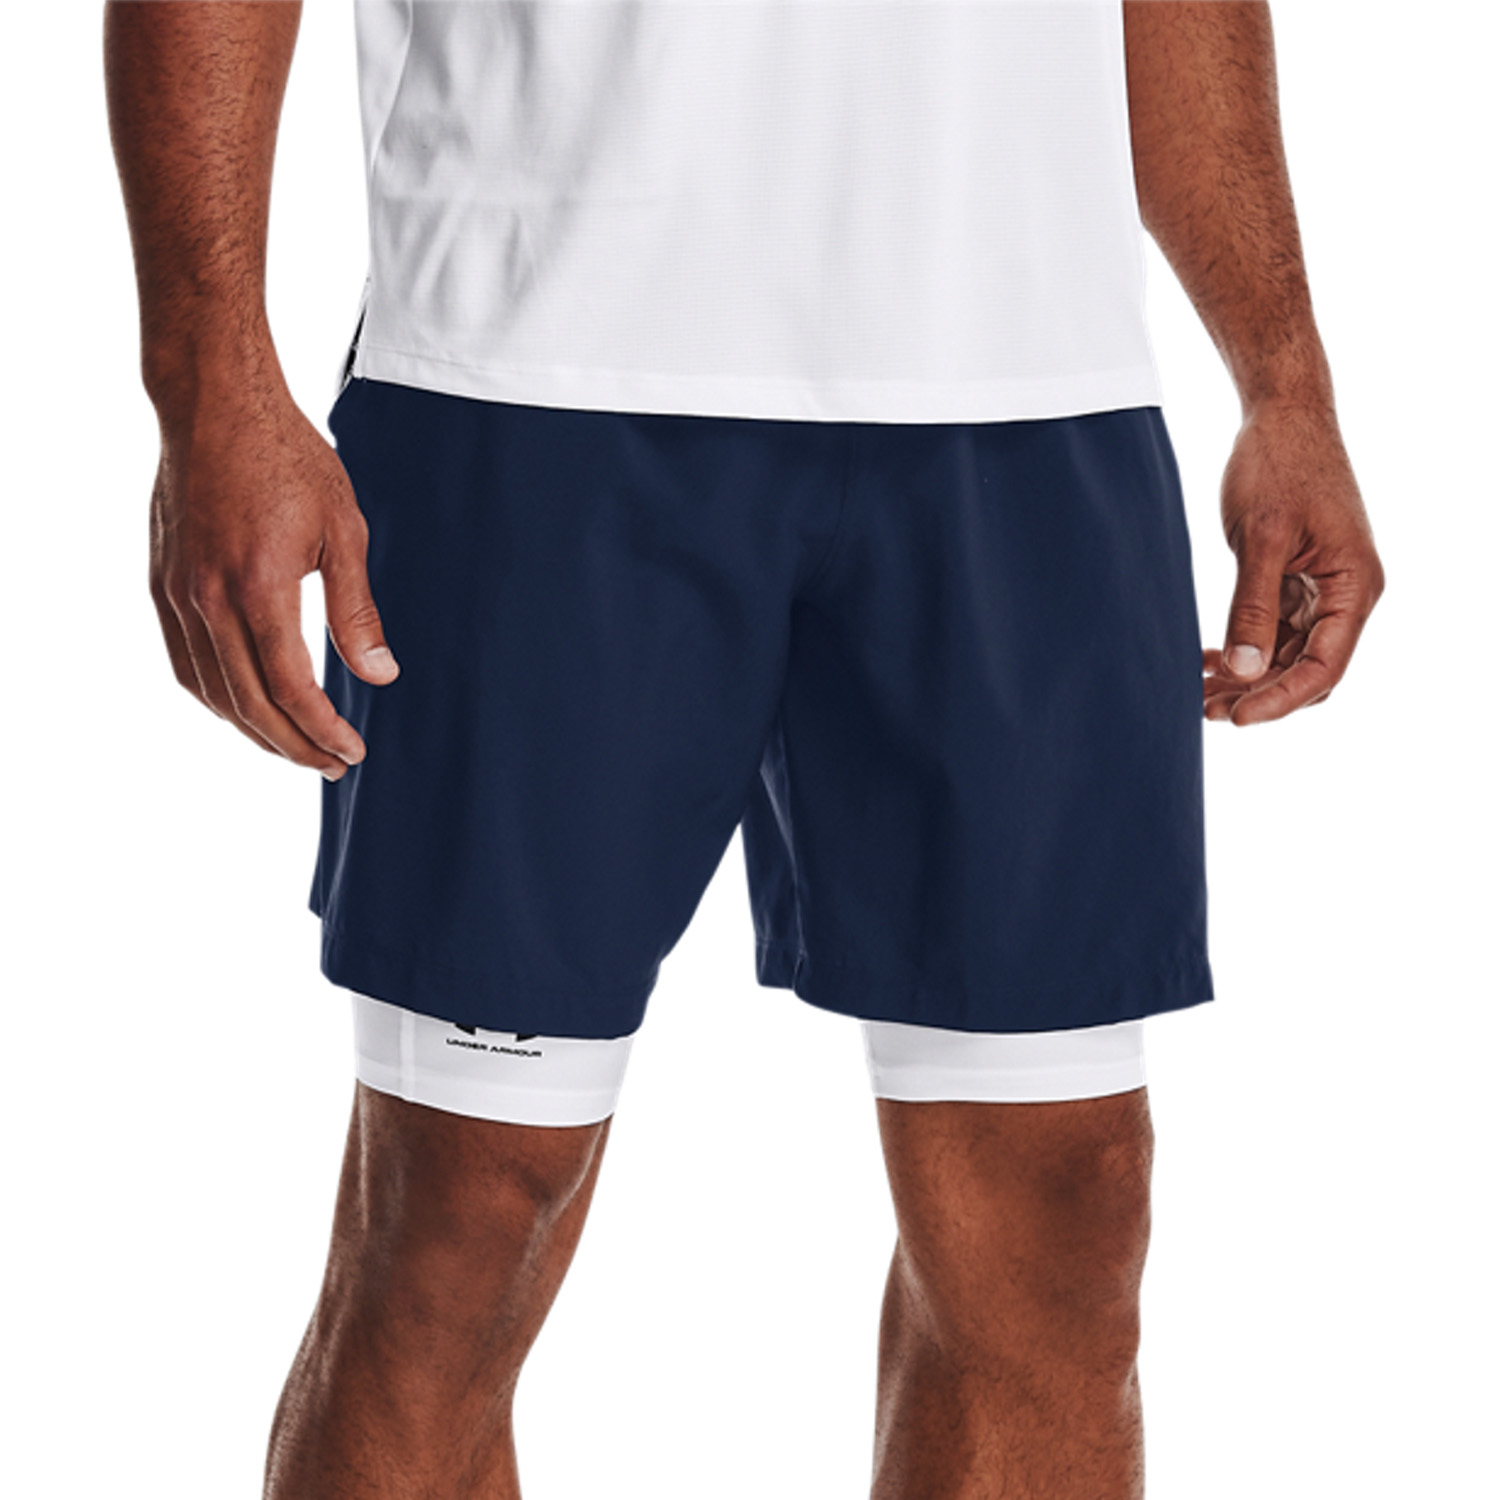 Under Armour Woven Graphic Men's Padel Shorts - Academy Navy